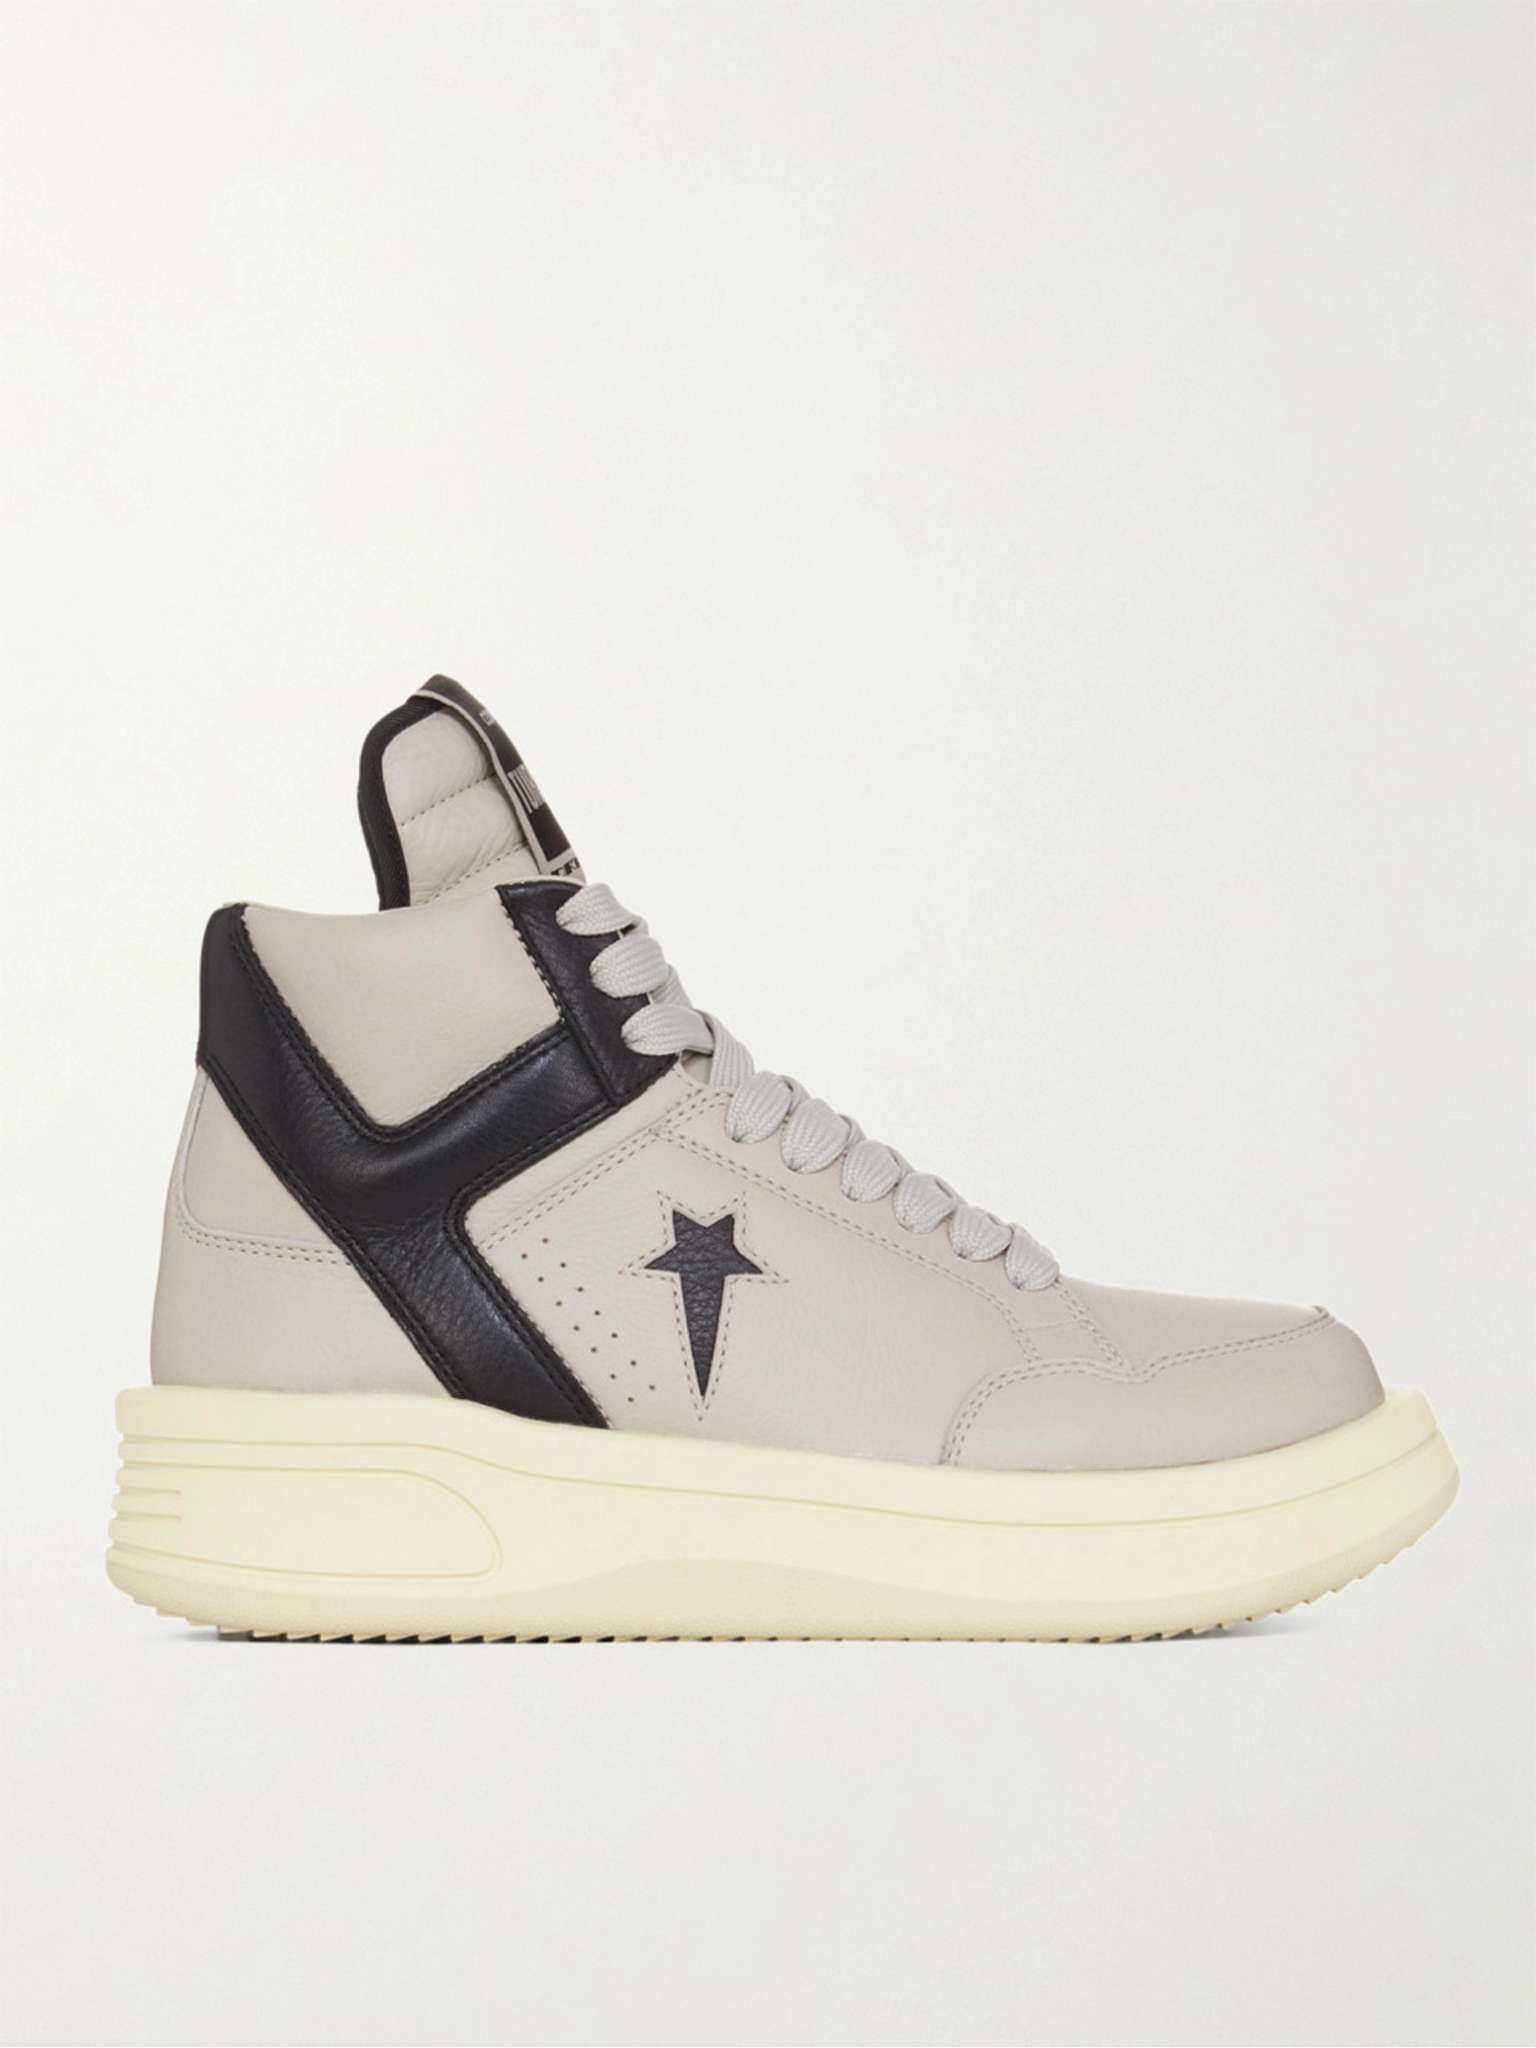 + Converse Turbowpn Leather High-Top Sneakers - 1